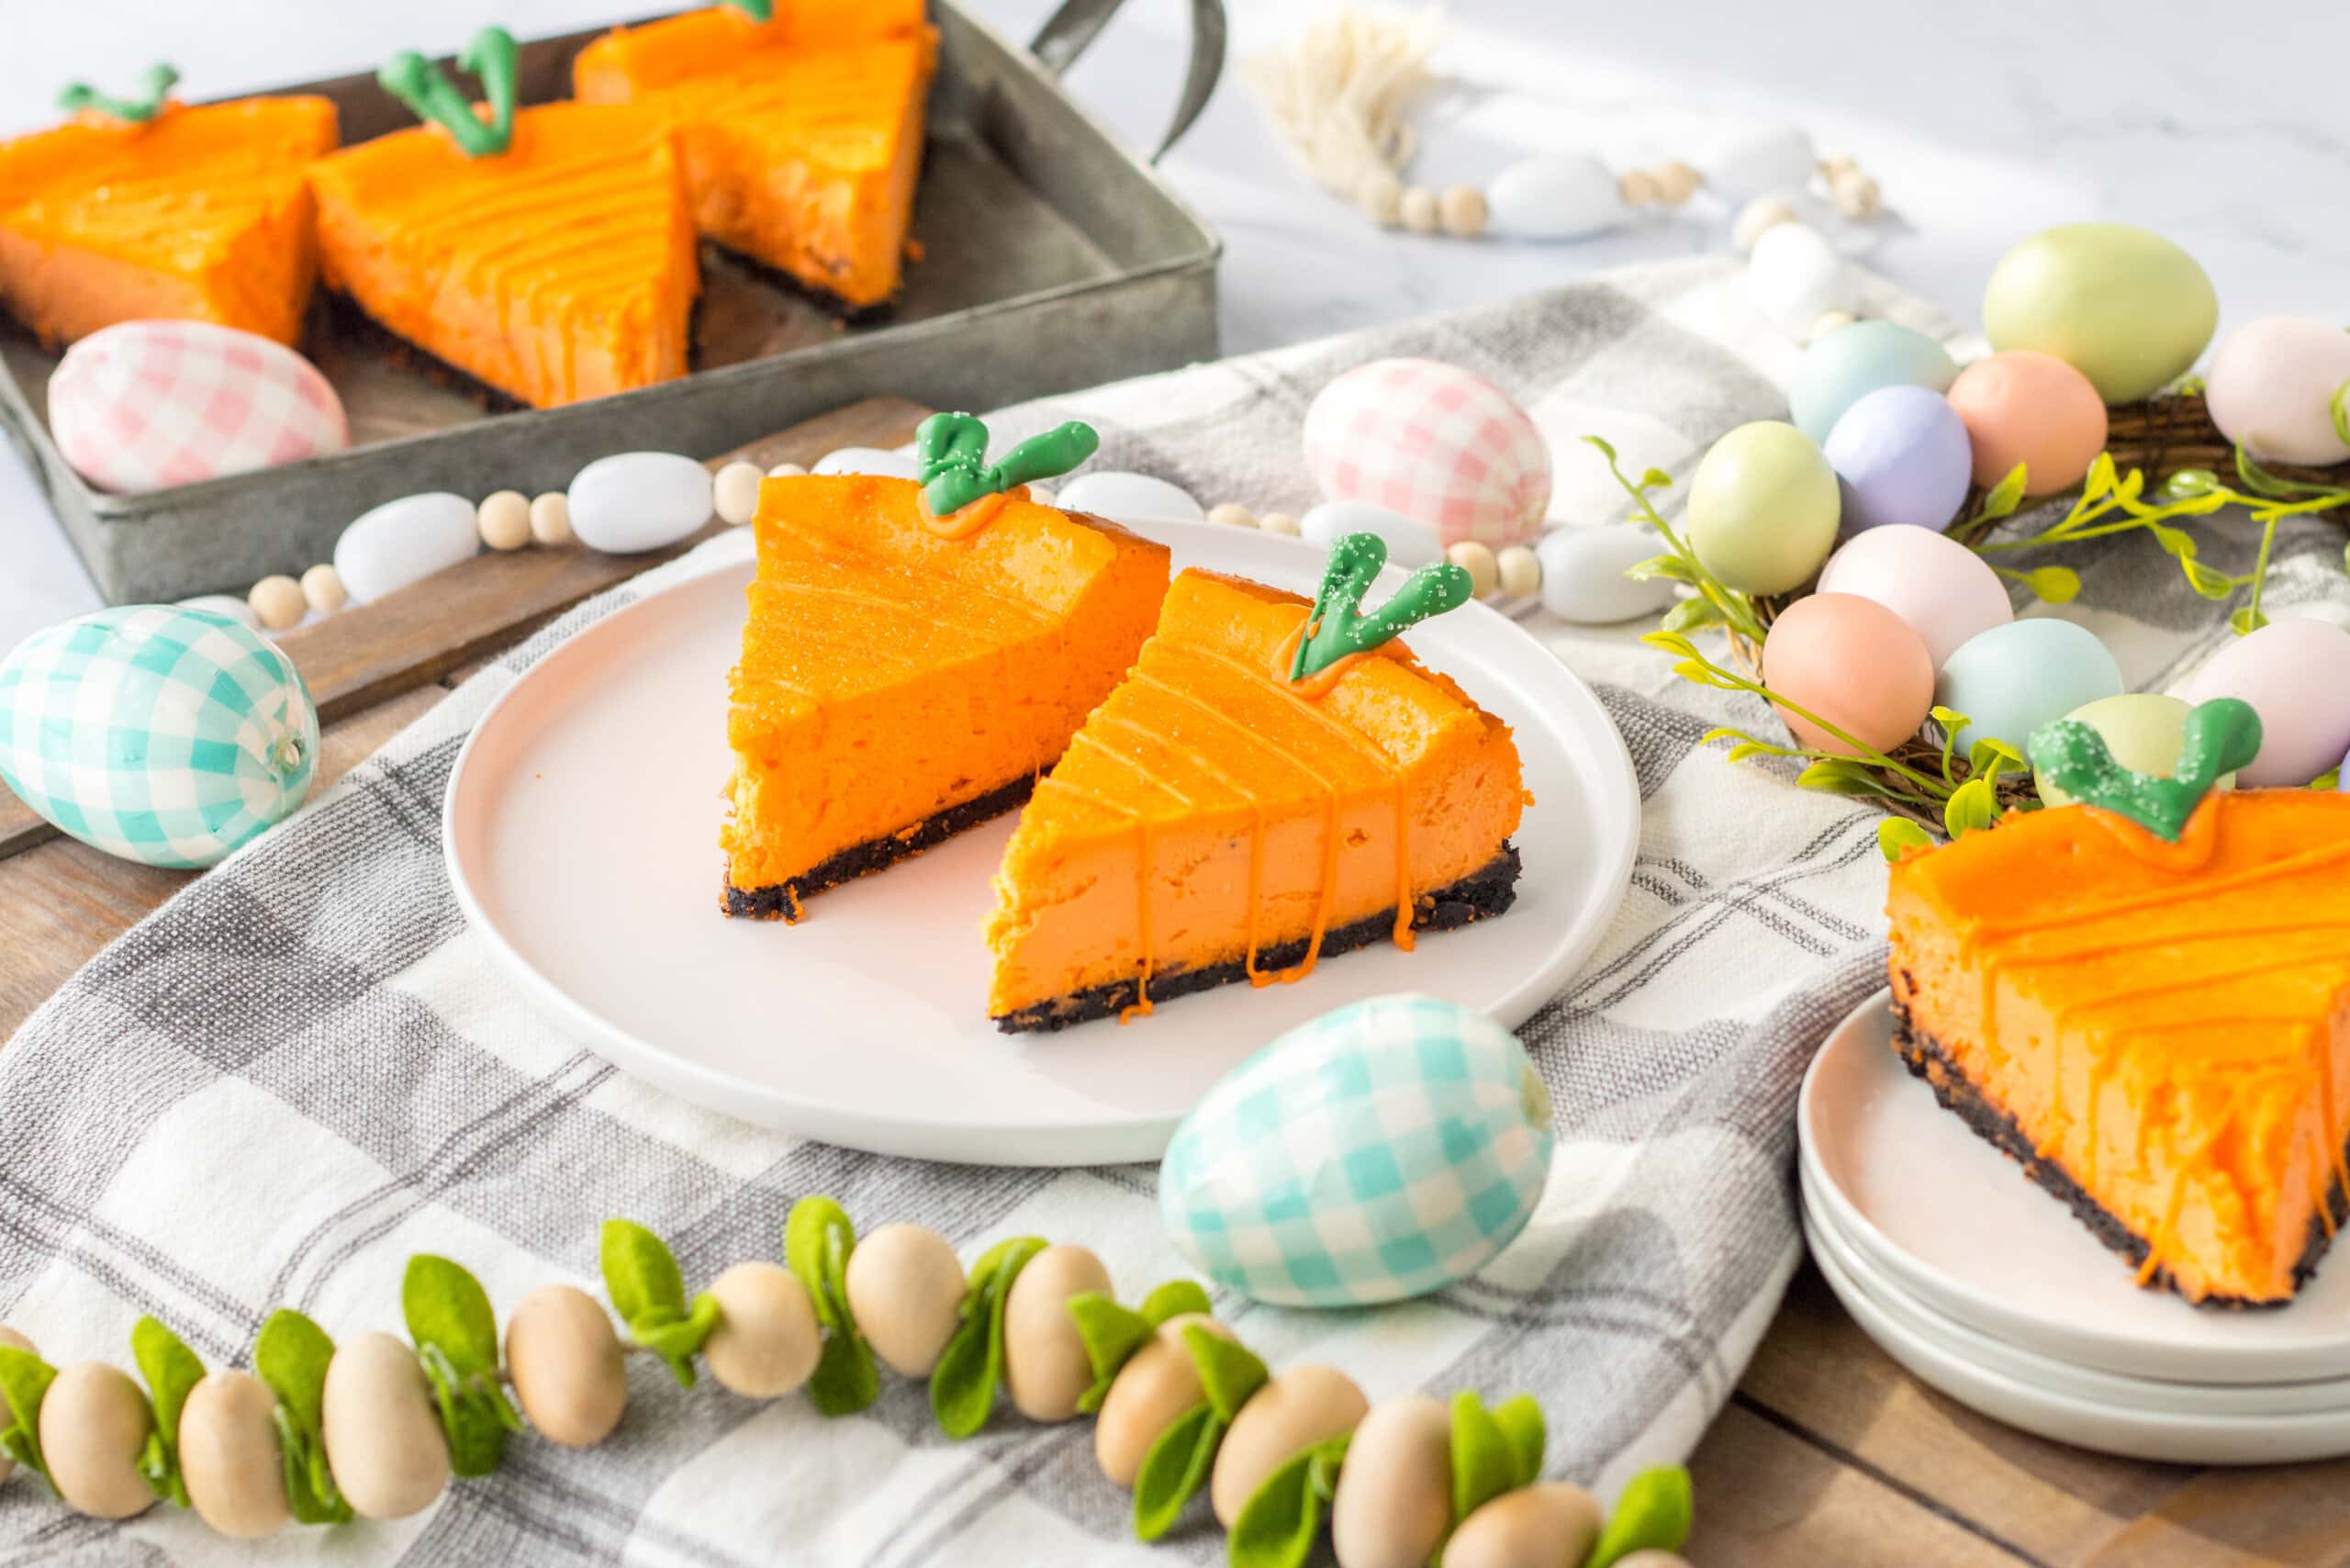 Carrot Cheesecake surrounded by easter eggs.
